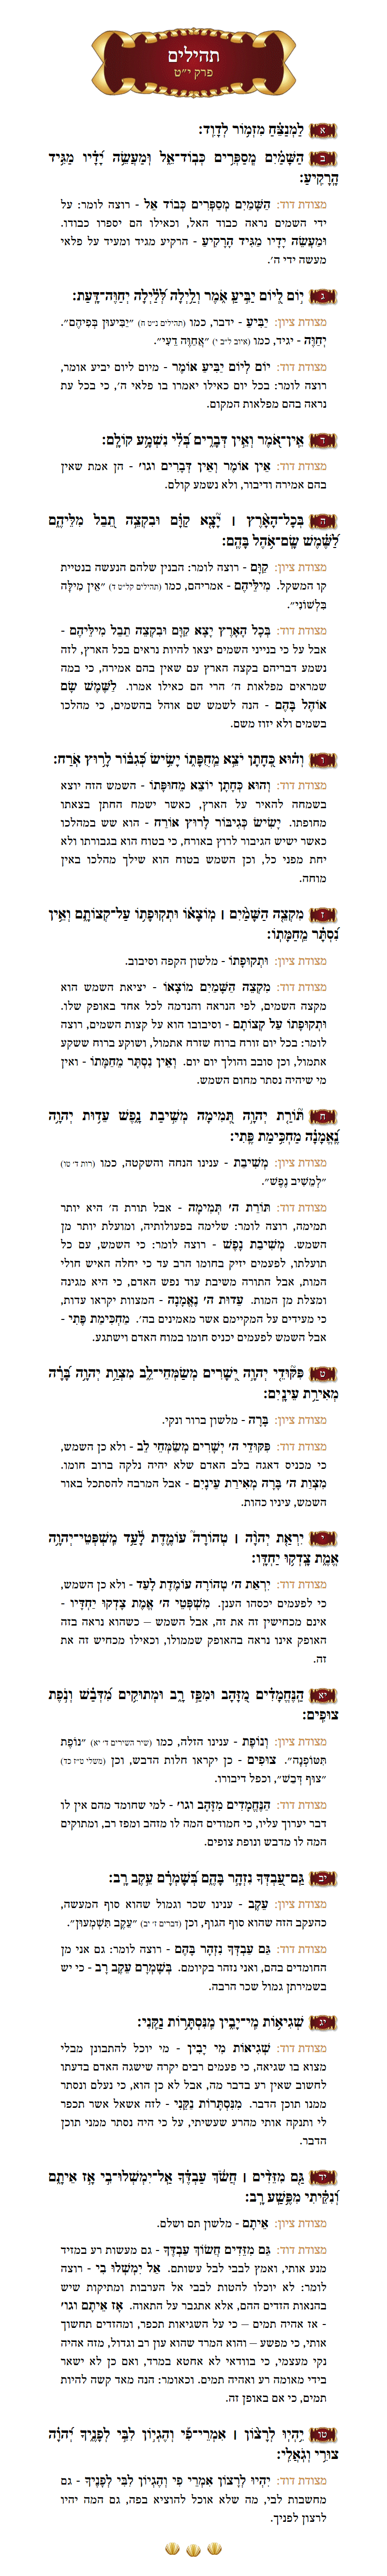 Sefer Tehillim Chapter 109 with commentary